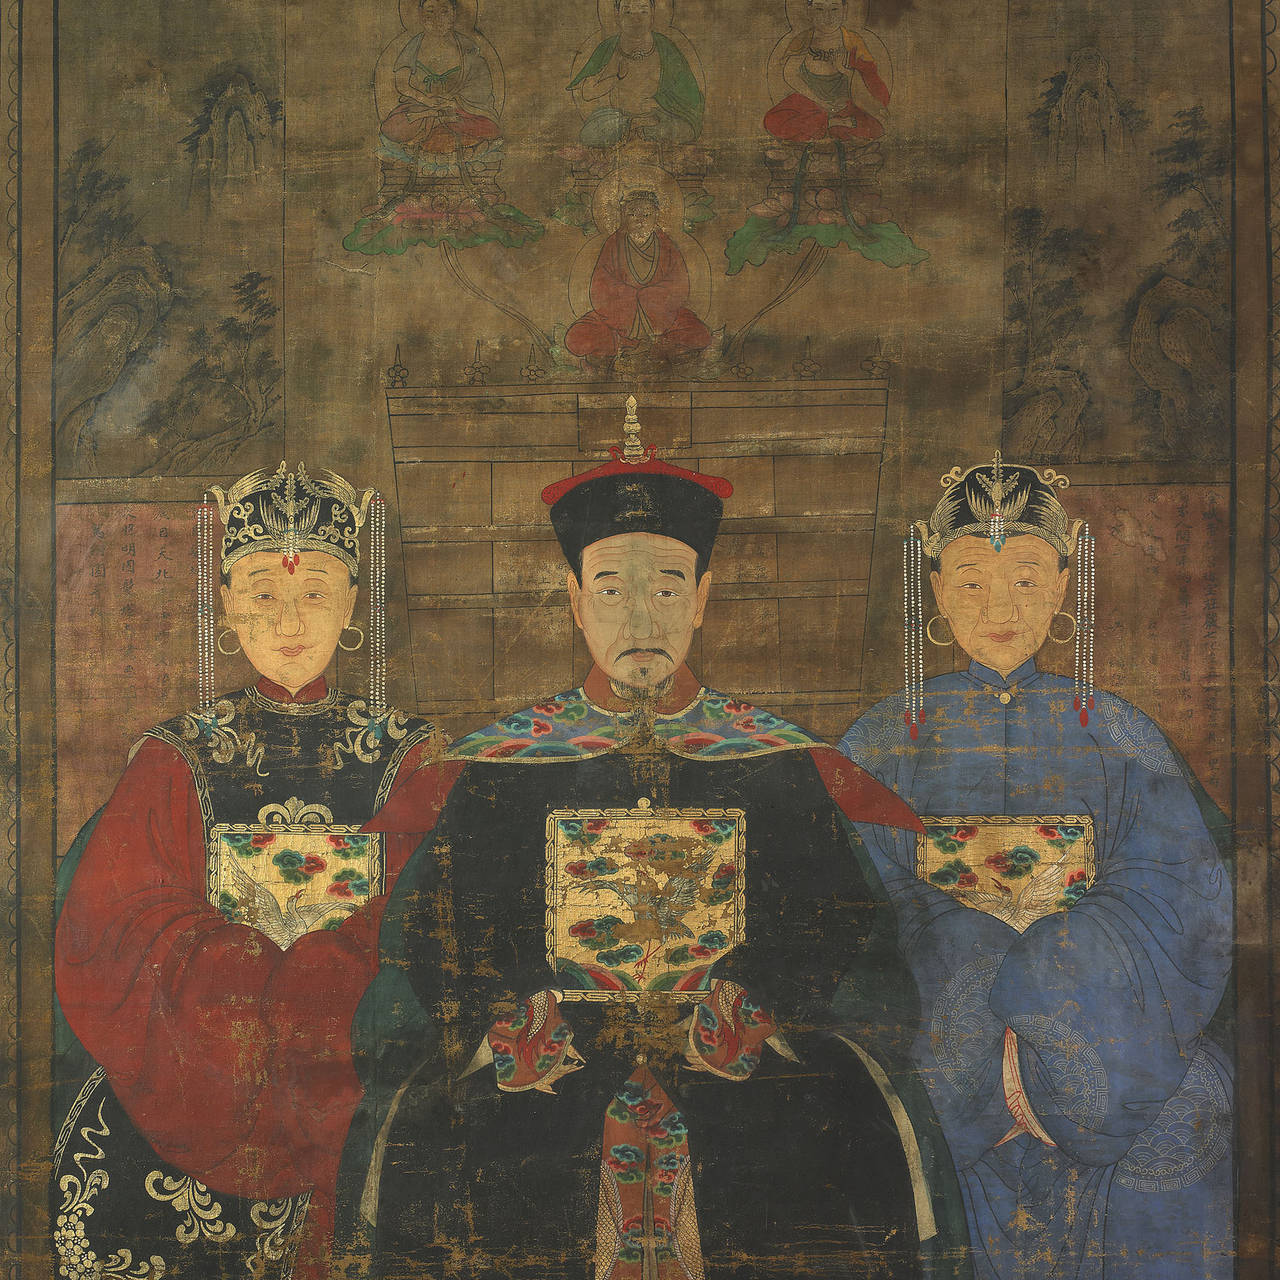 Qianlong's portrait with his consorts. A large painting full of traditional Chinese symbols of the Emperor, as the beautiful dragon that wraps around Qianlong's robe, or even the four Buddha of meditation in the cardinal points. The painting dates